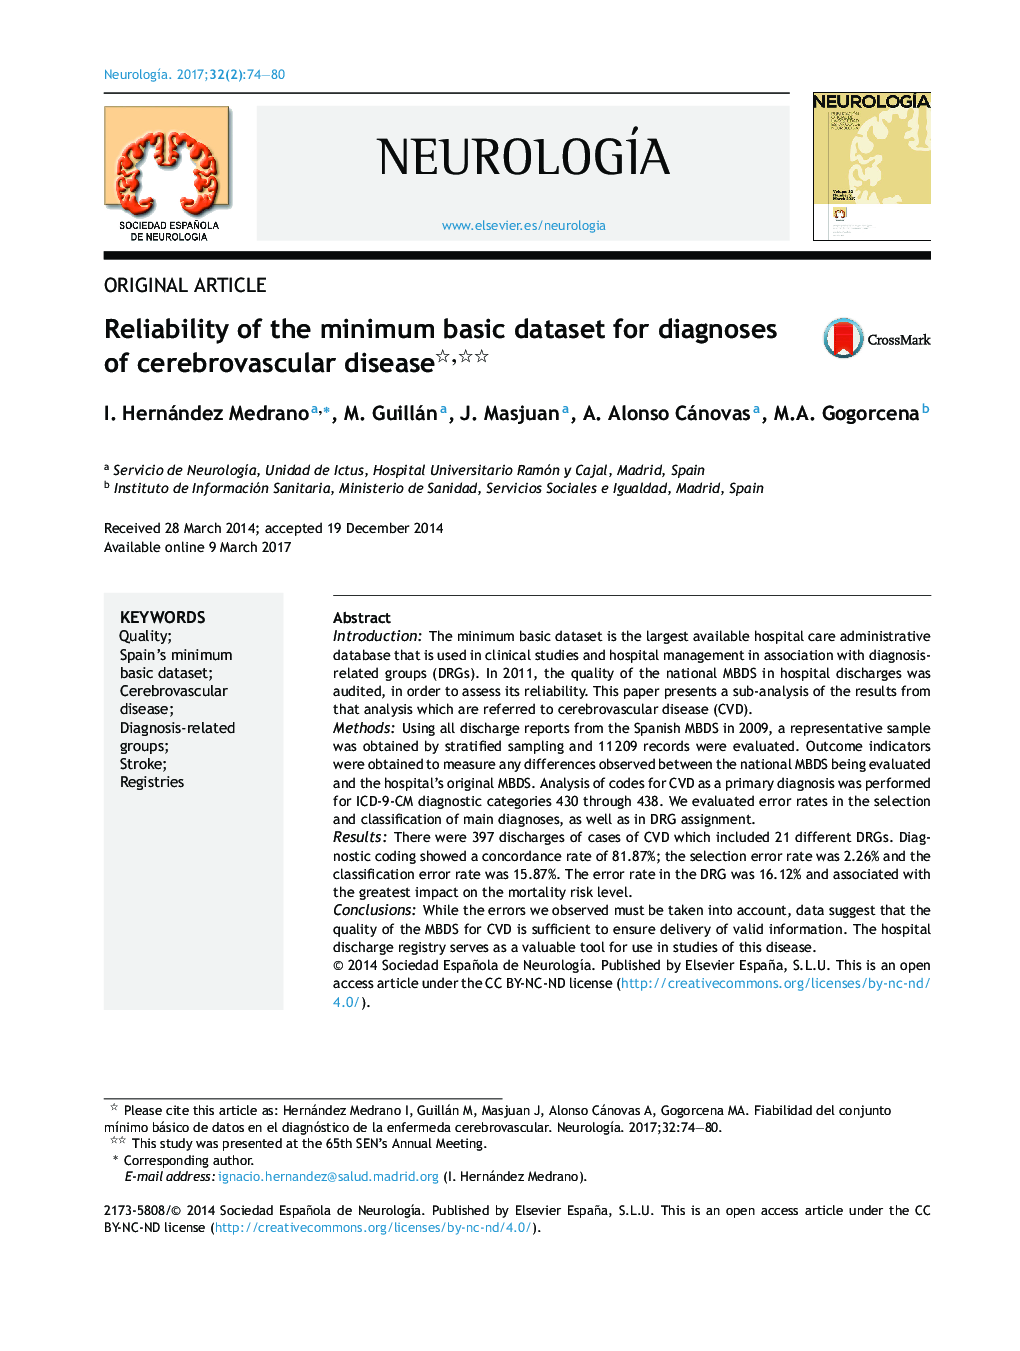 Reliability of the minimum basic dataset for diagnoses of cerebrovascular disease